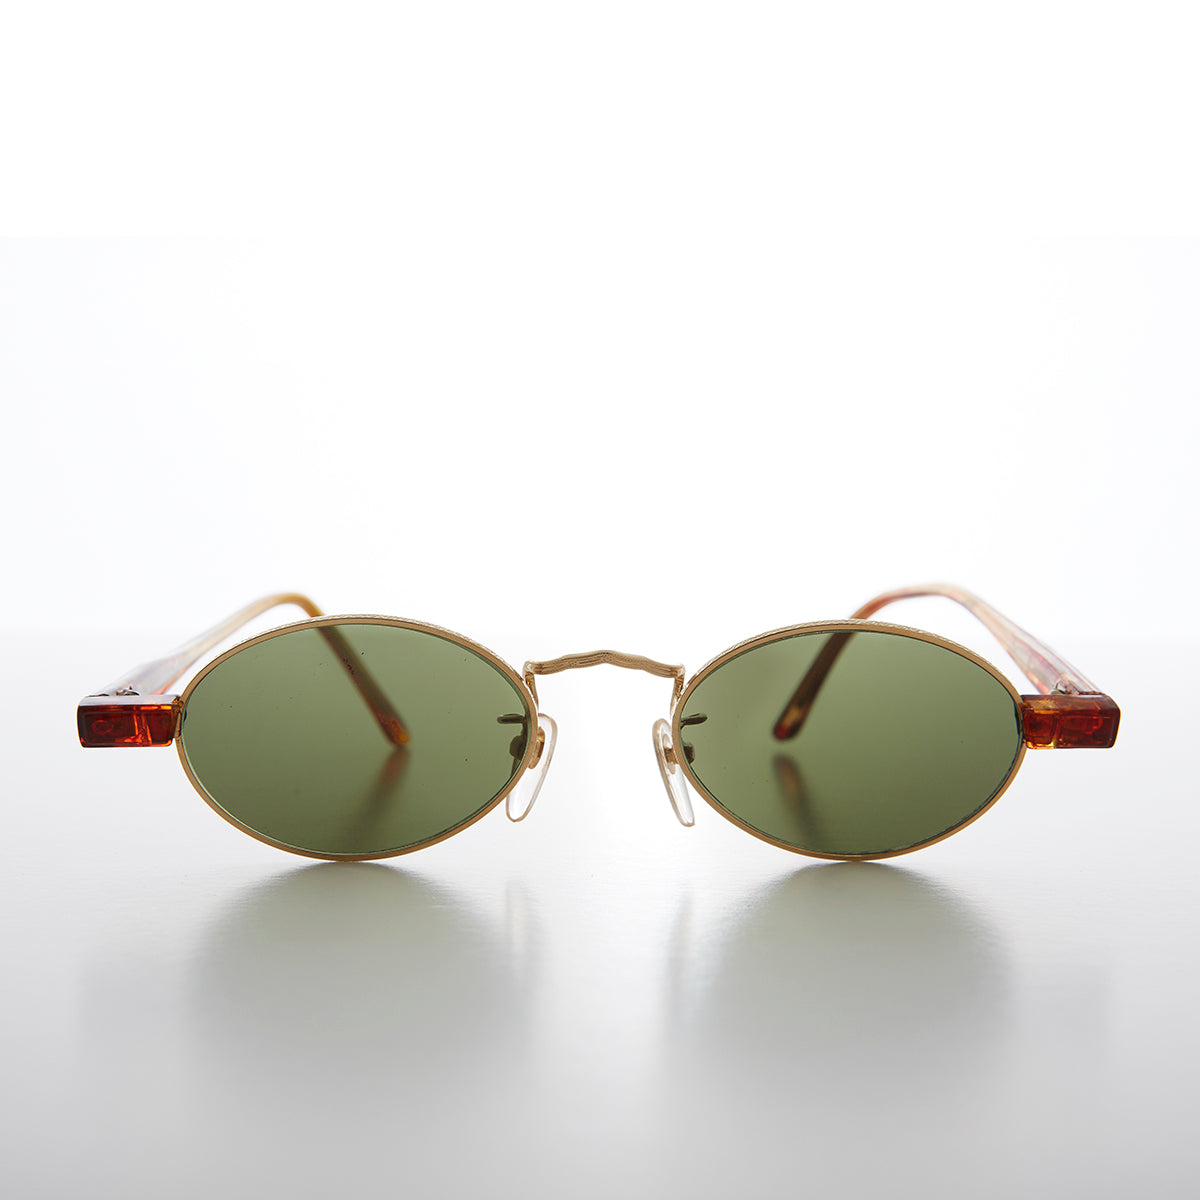 Small Oval Spectacle Style Vintage Sunglasses